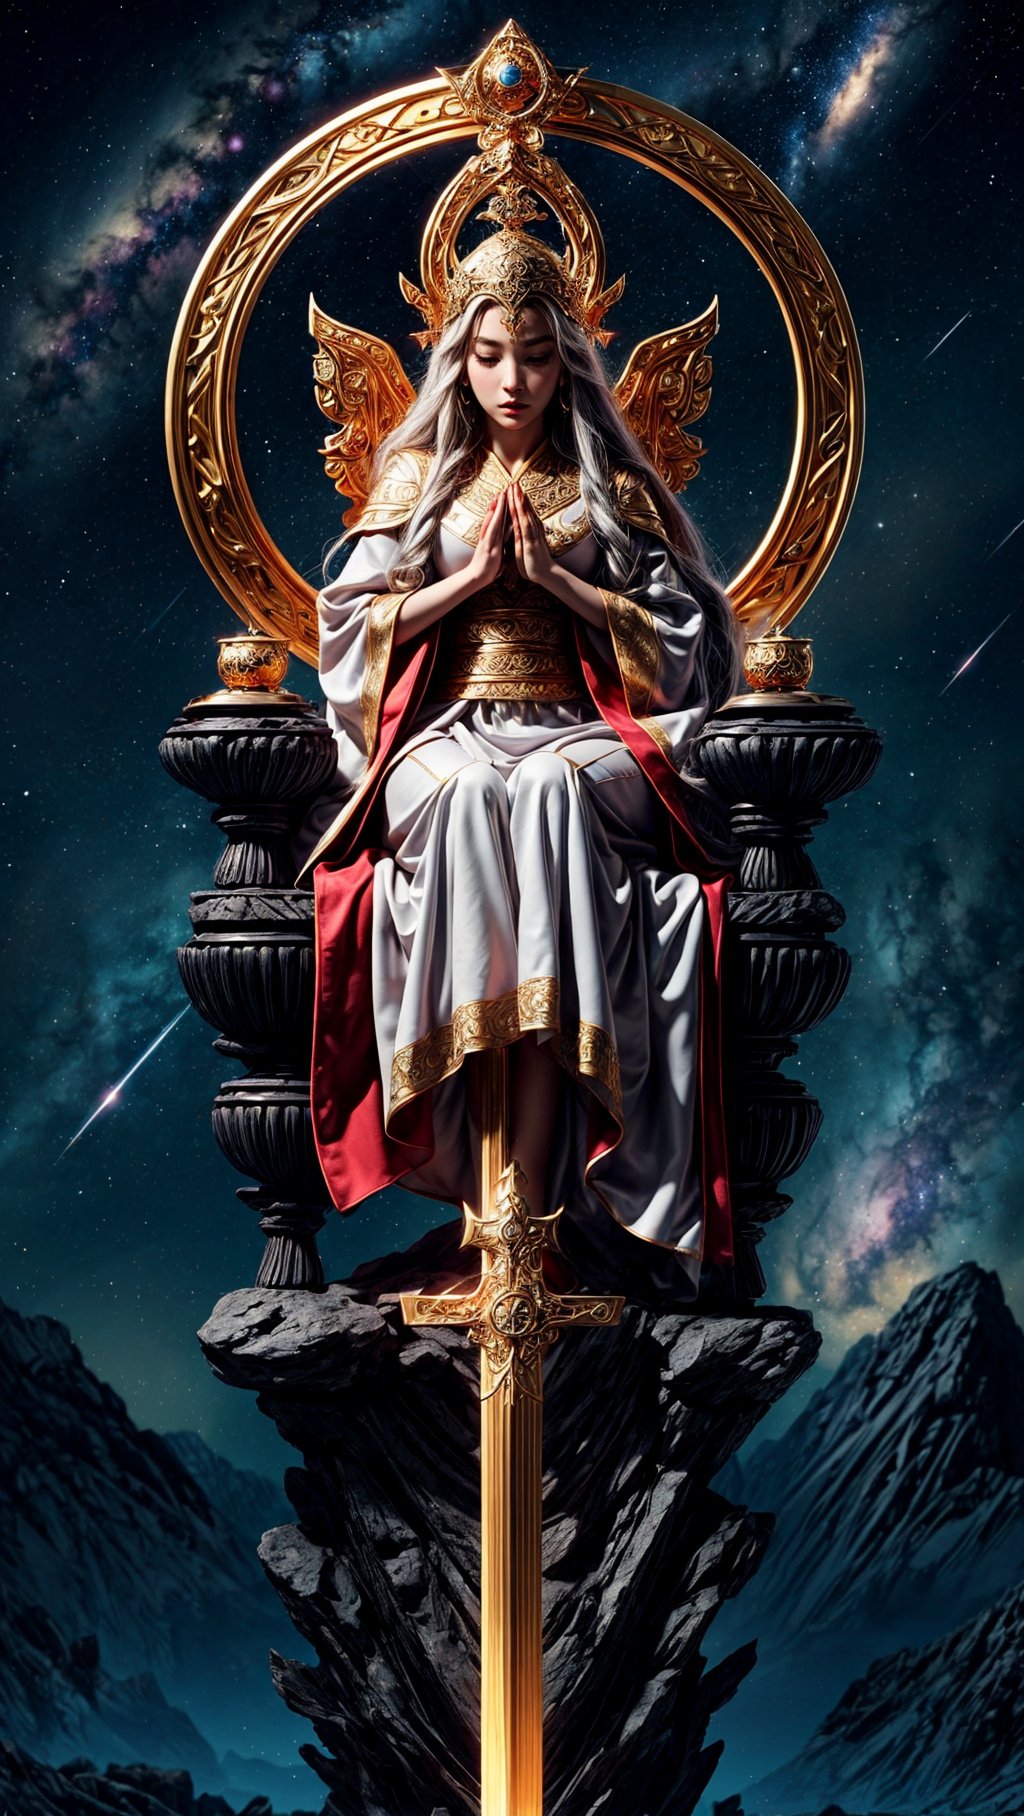 1 girl, throne, tunic,swords, large, robes, taight robes, galaxy, universe, conteslations, loto position, padmasana, meditating, levitating, norse mythology symbols, myth, valhalla, on top, night, stars, Shooting Star, bright sky, dynamic, ethereal glow, cosmic, godlike, divine, tenebrous, perfect face, korean face, serious face, looking at viewer, perfect eyesight, golden eyes, runes, long hair
